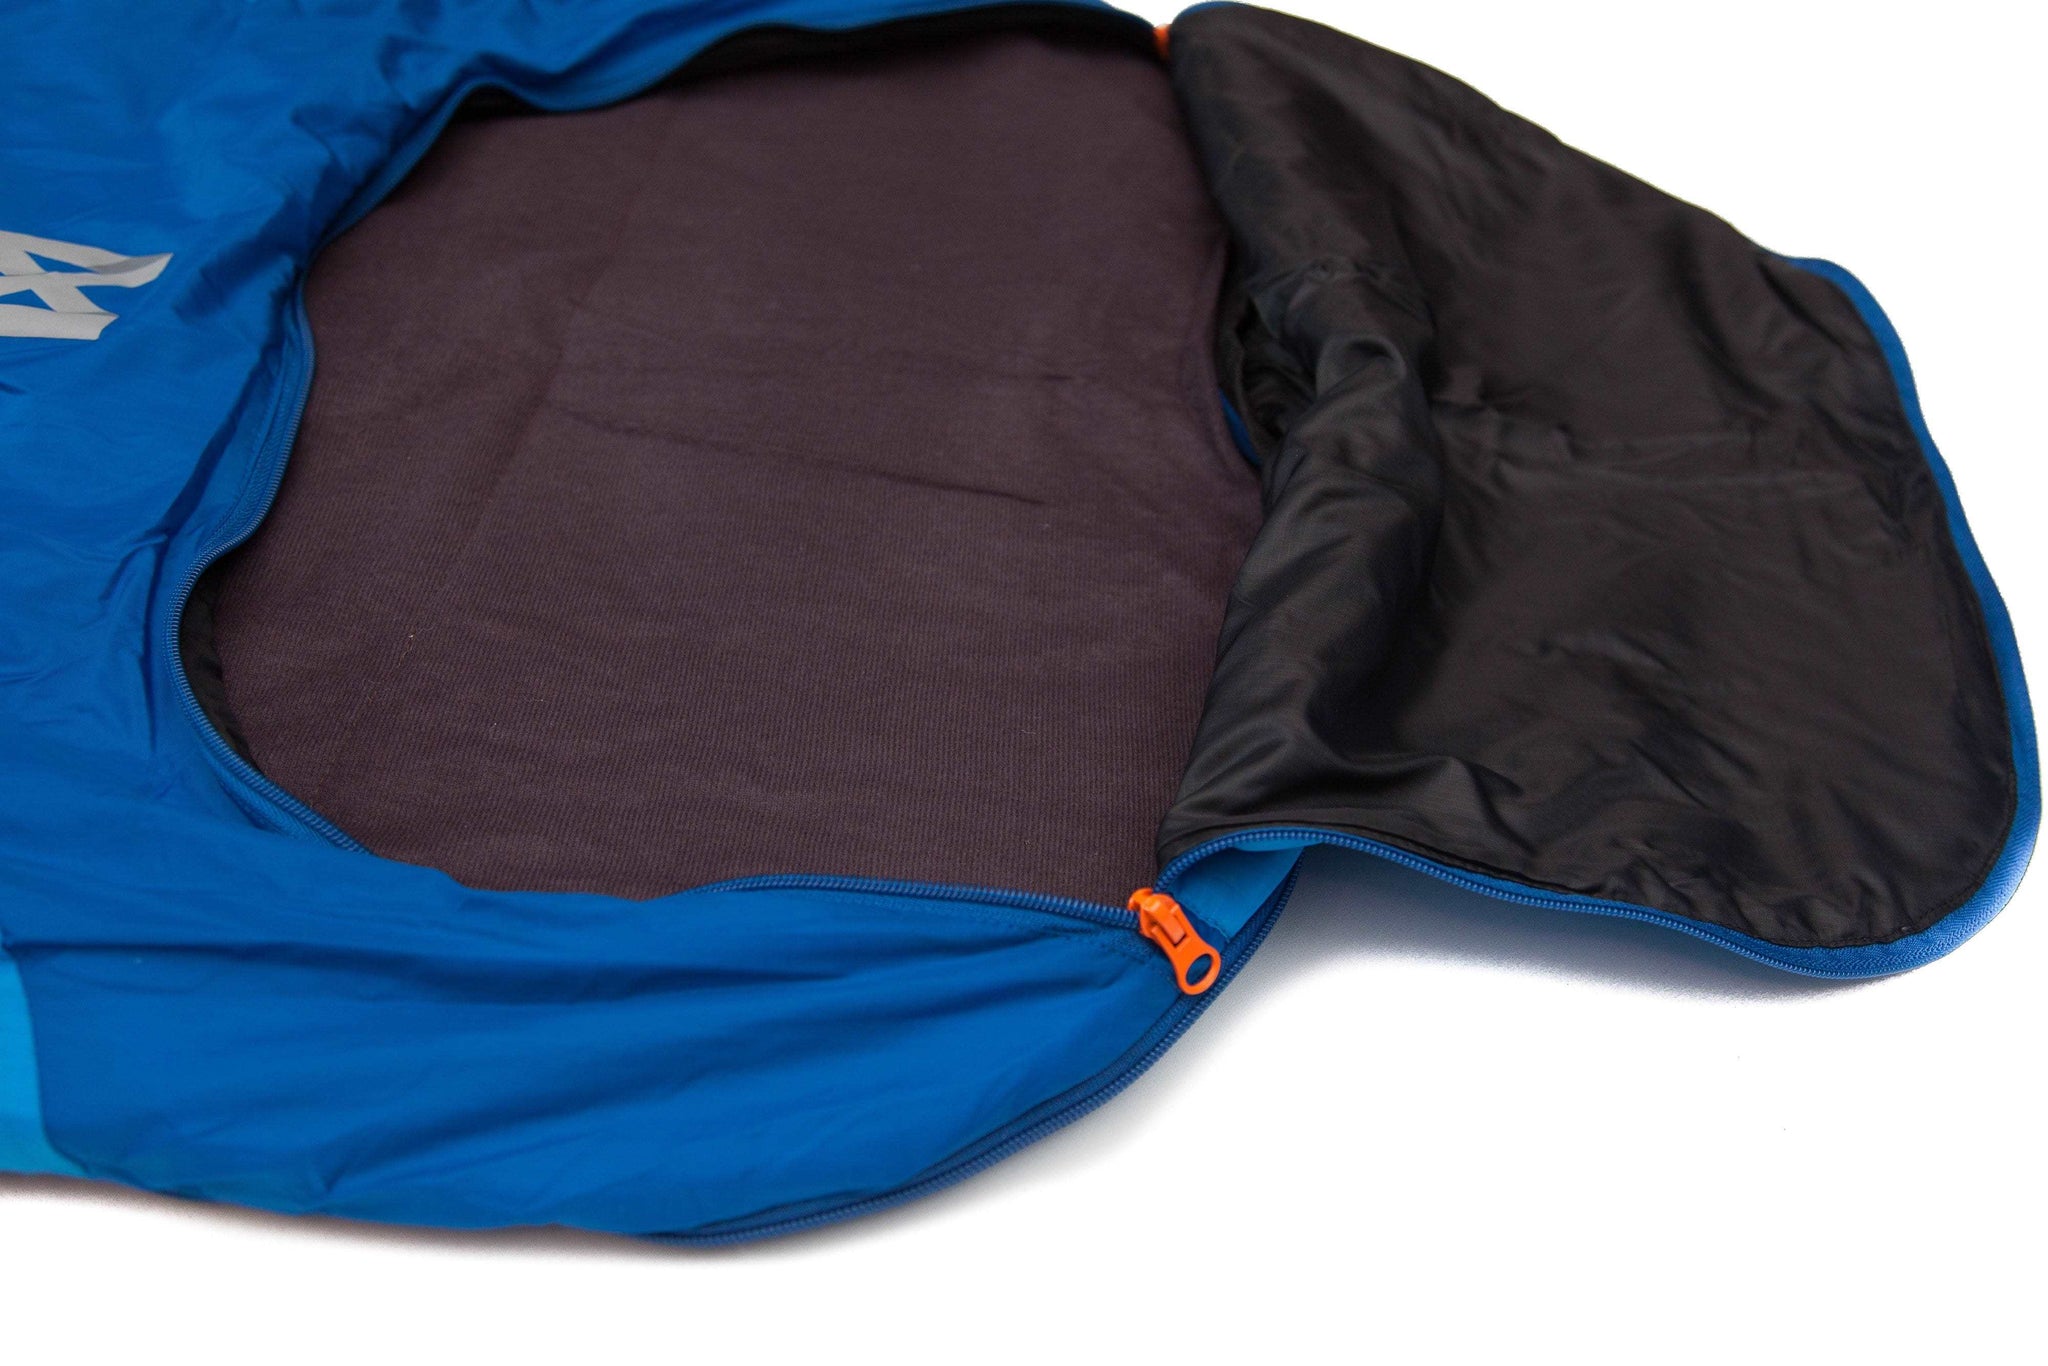 Close up picture of the Ly Sleeping Bag area open for the dog's head